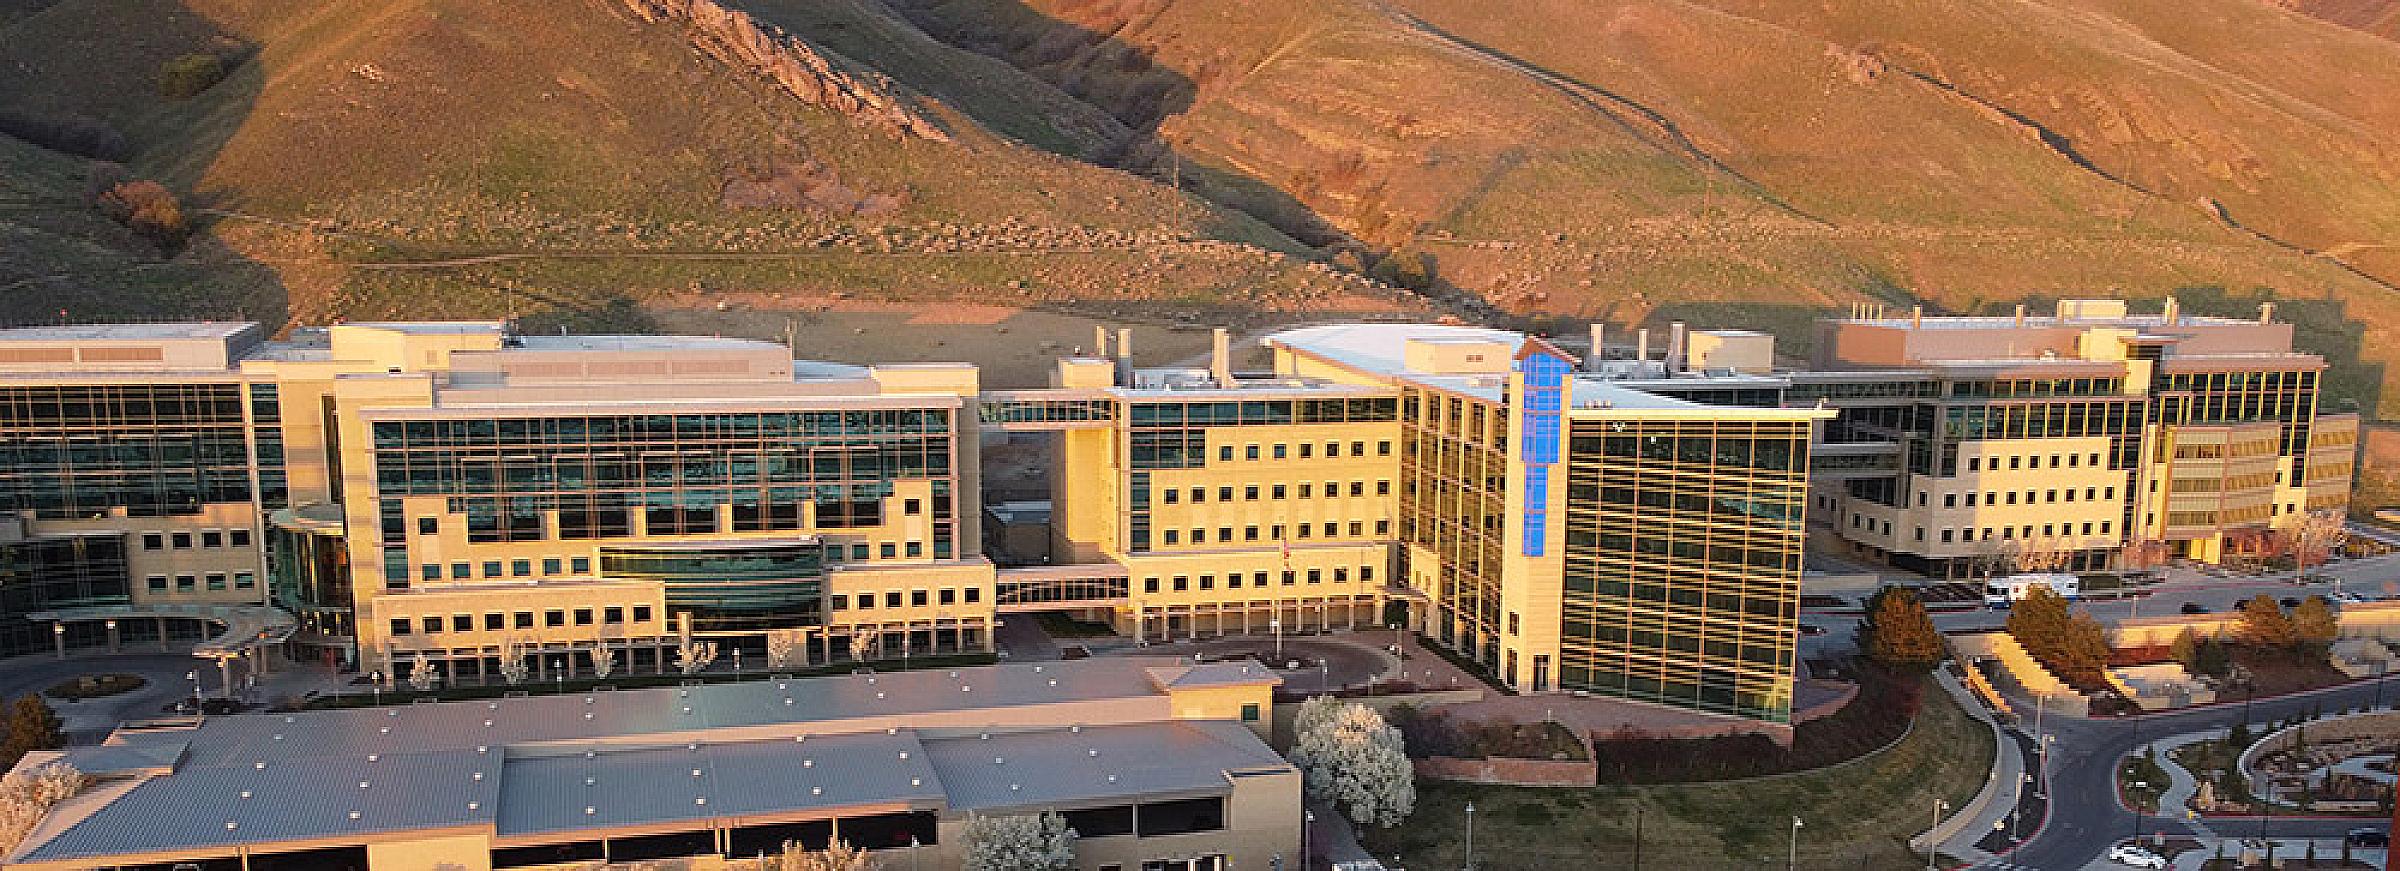 HCI Campus at Sunset From Above 2021